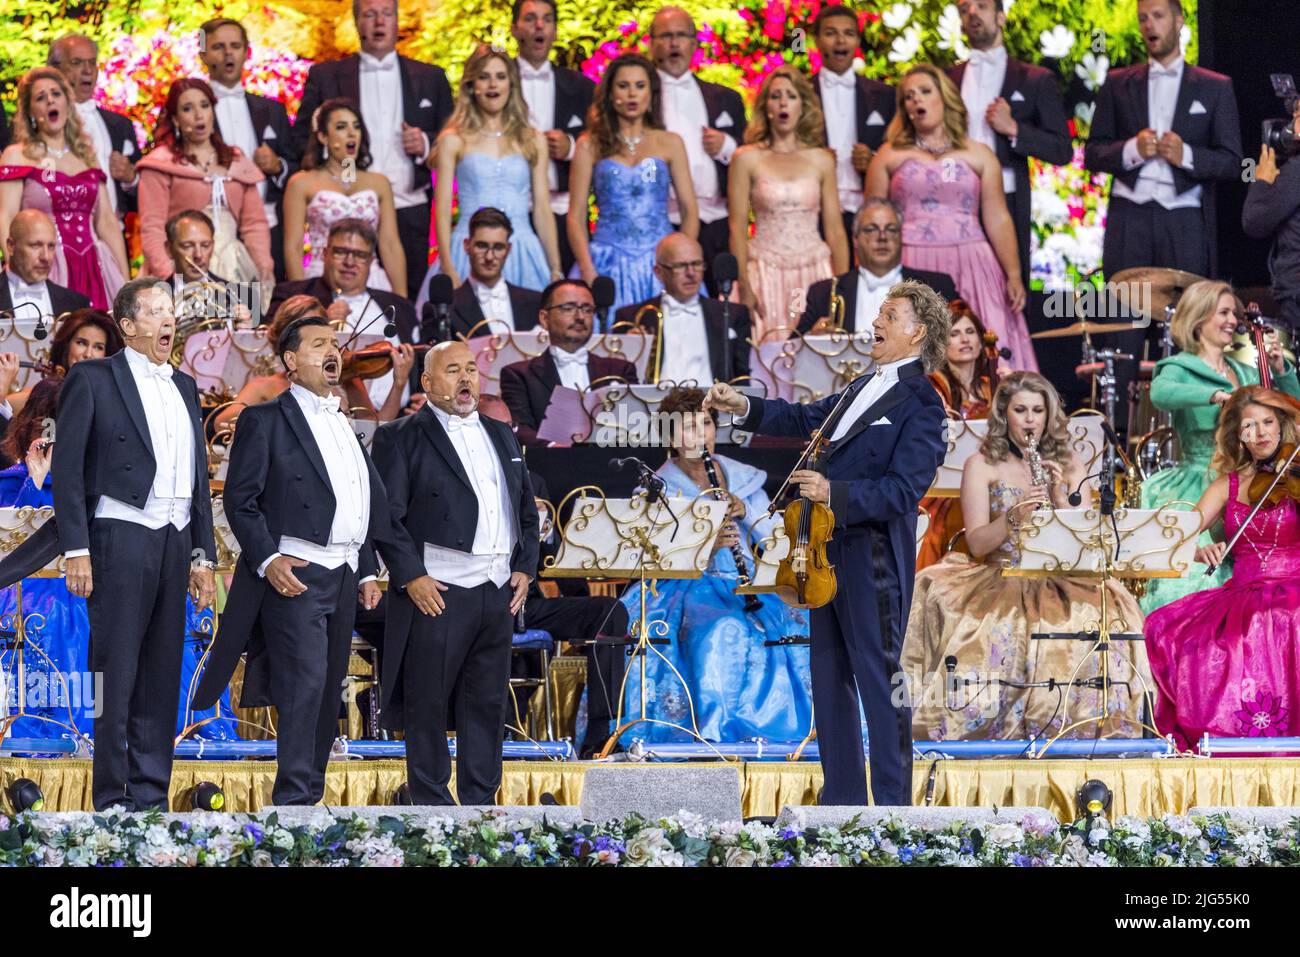 2022-07-07 21:14:07 MAASTRICHT - Violinist Andre Rieu during a concert at the Vrijthof. It is the start of a whole series of concerts on the Maastricht square. ANP KIPPA MARCEL VAN HOORN netherlands out - belgium out Stock Photo